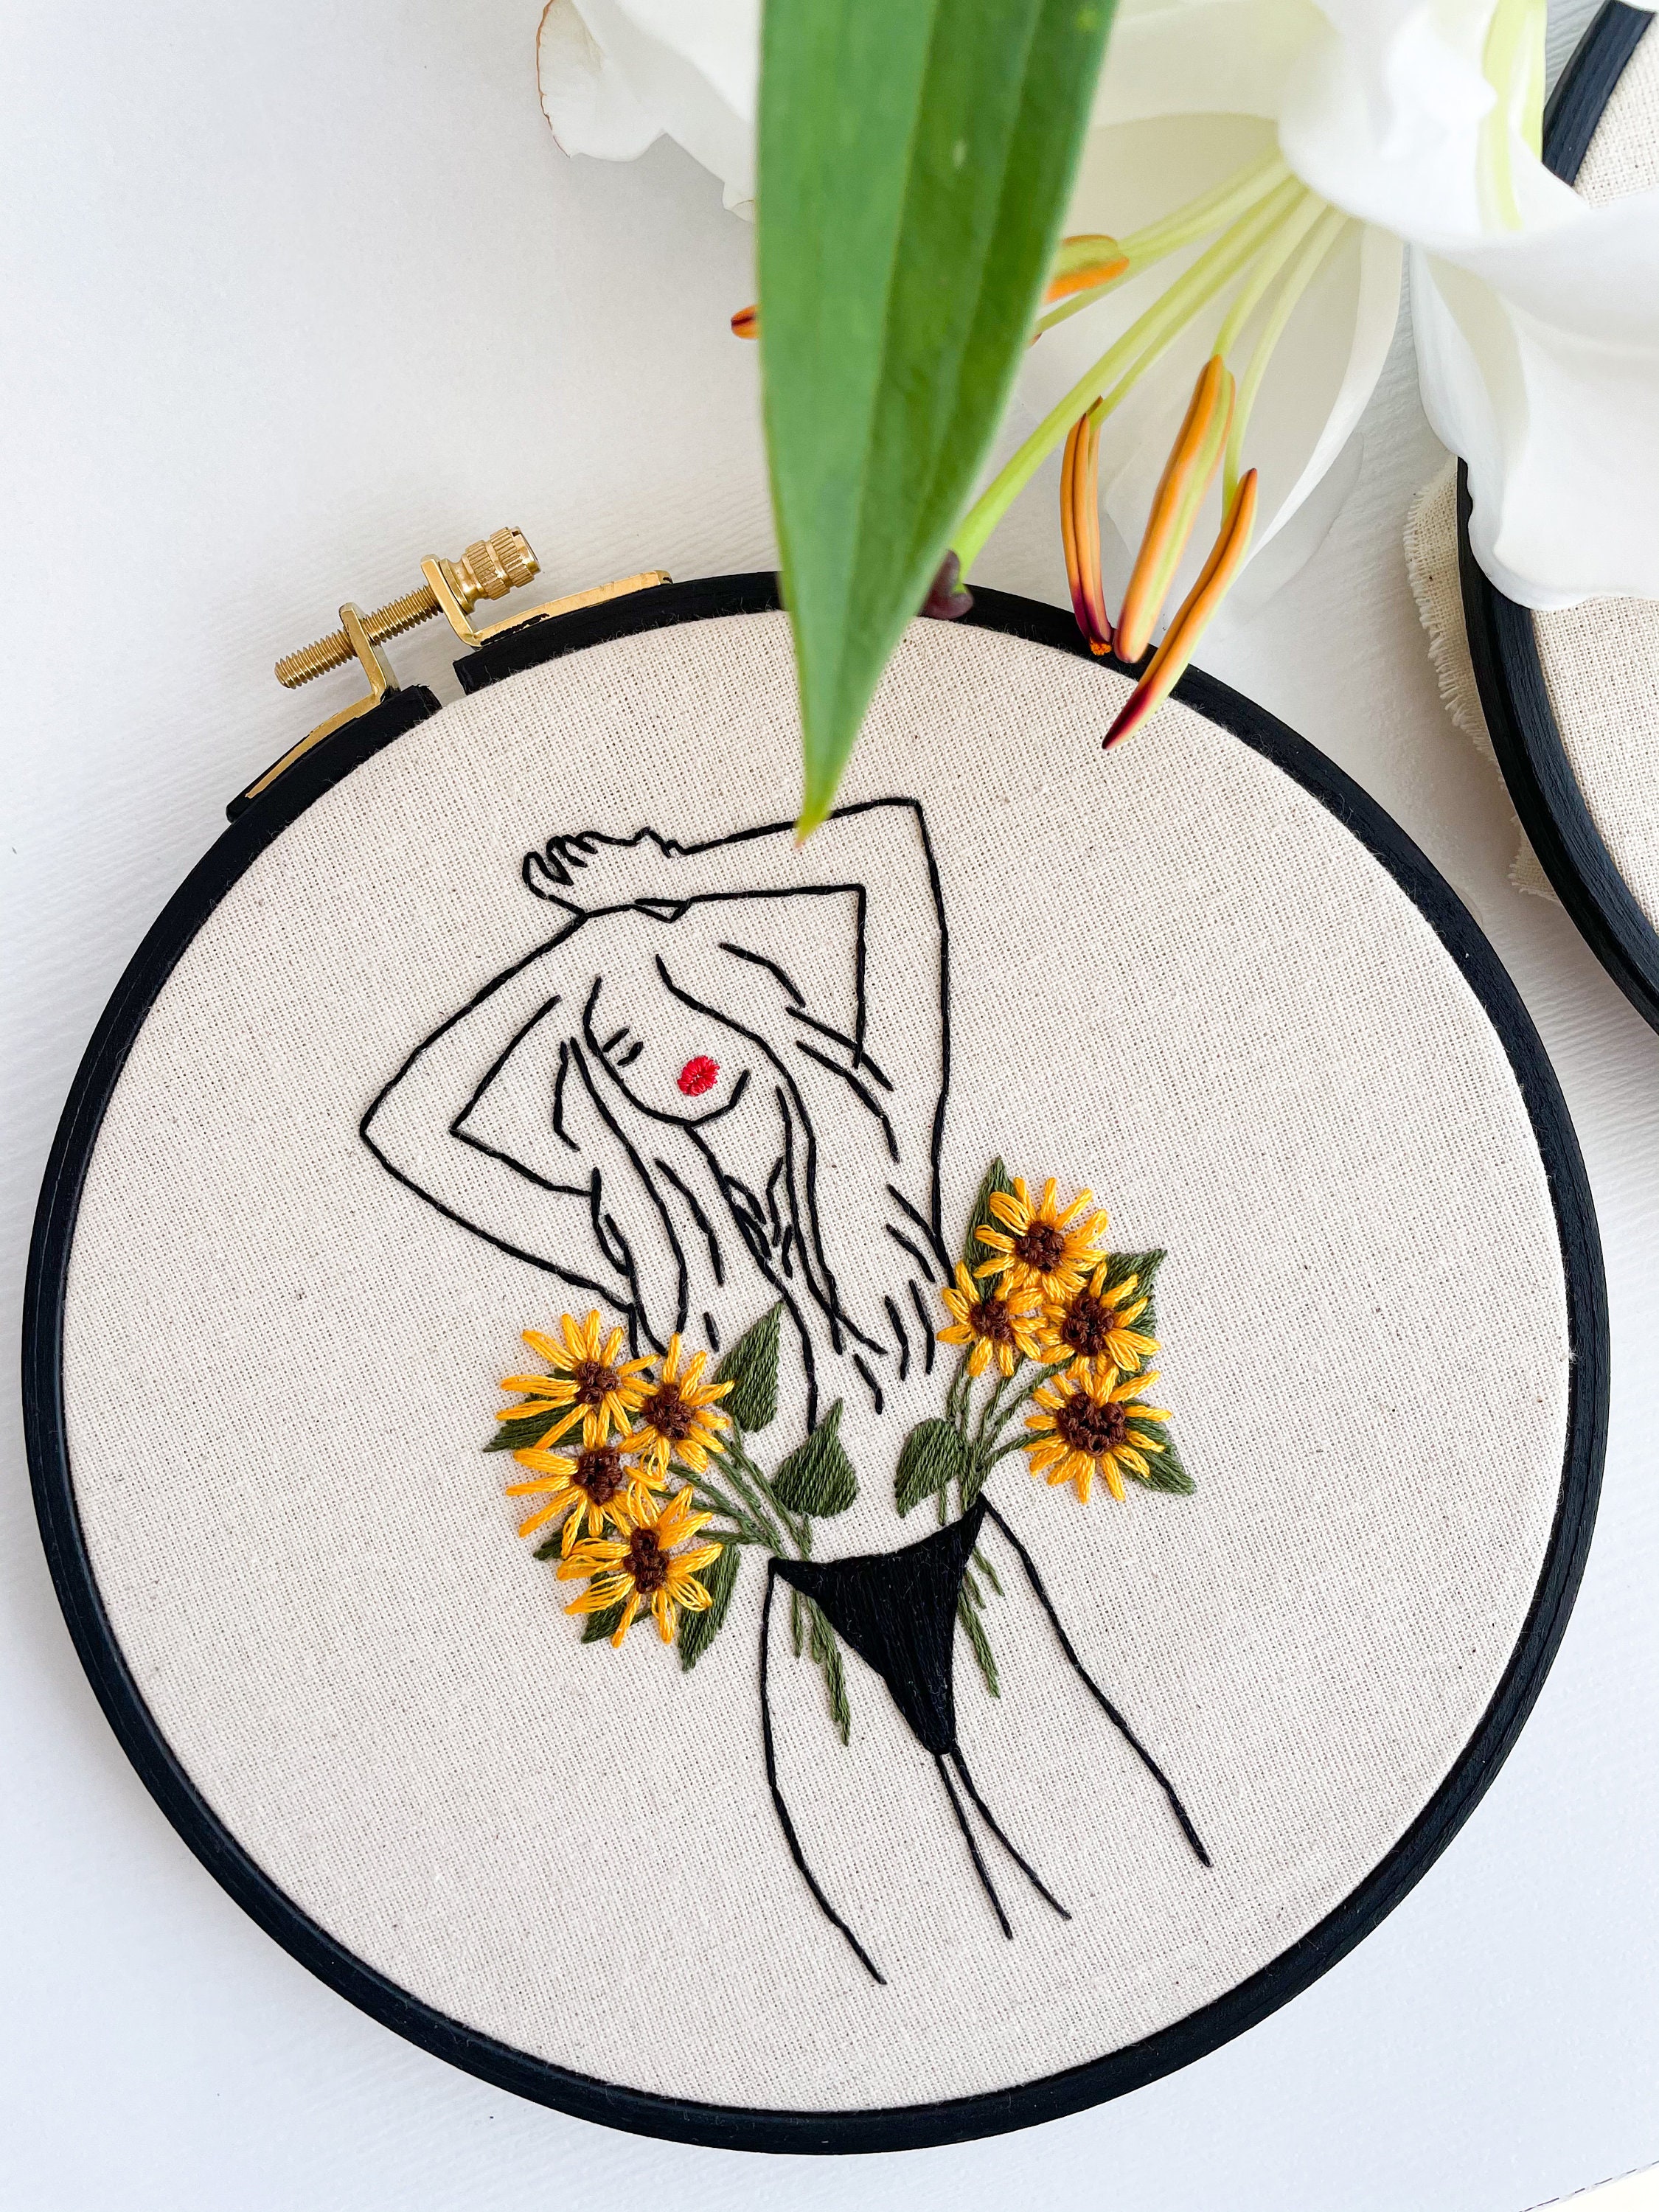 Women in Power Embroidery Kit (KBJ) - The Other Cat Creations